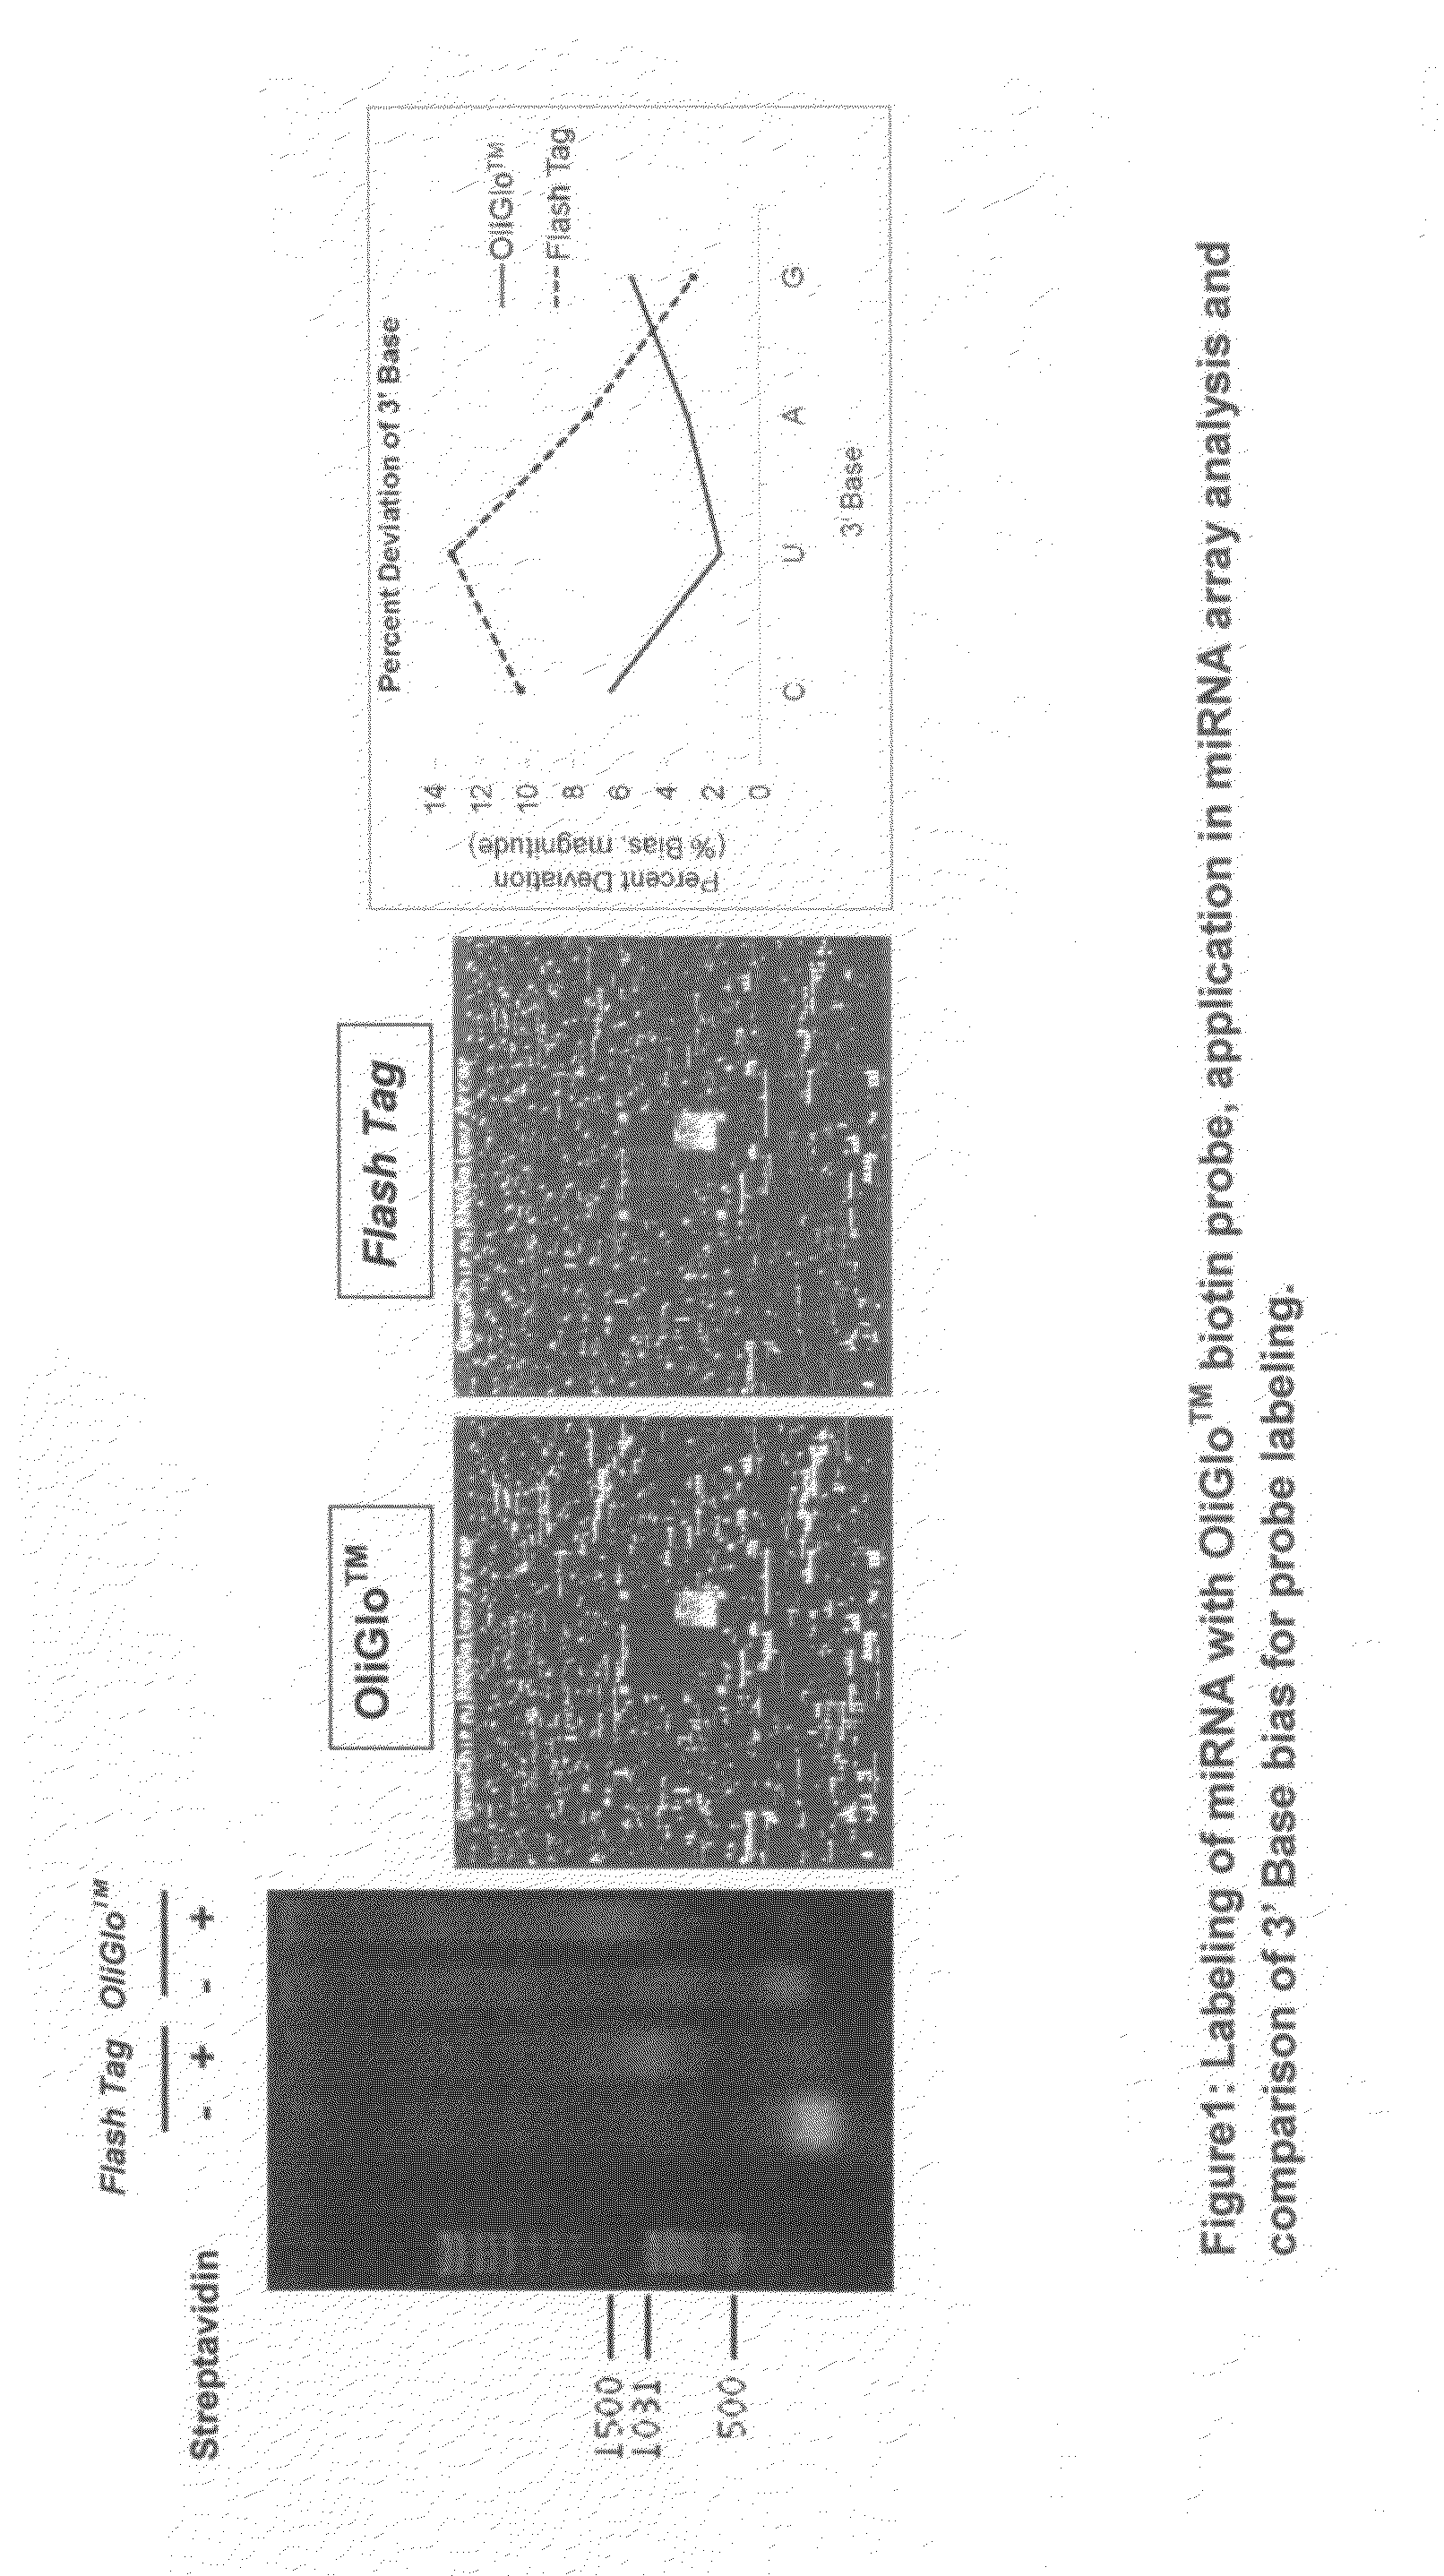 Reagents and methods for direct labeling of nucleotides